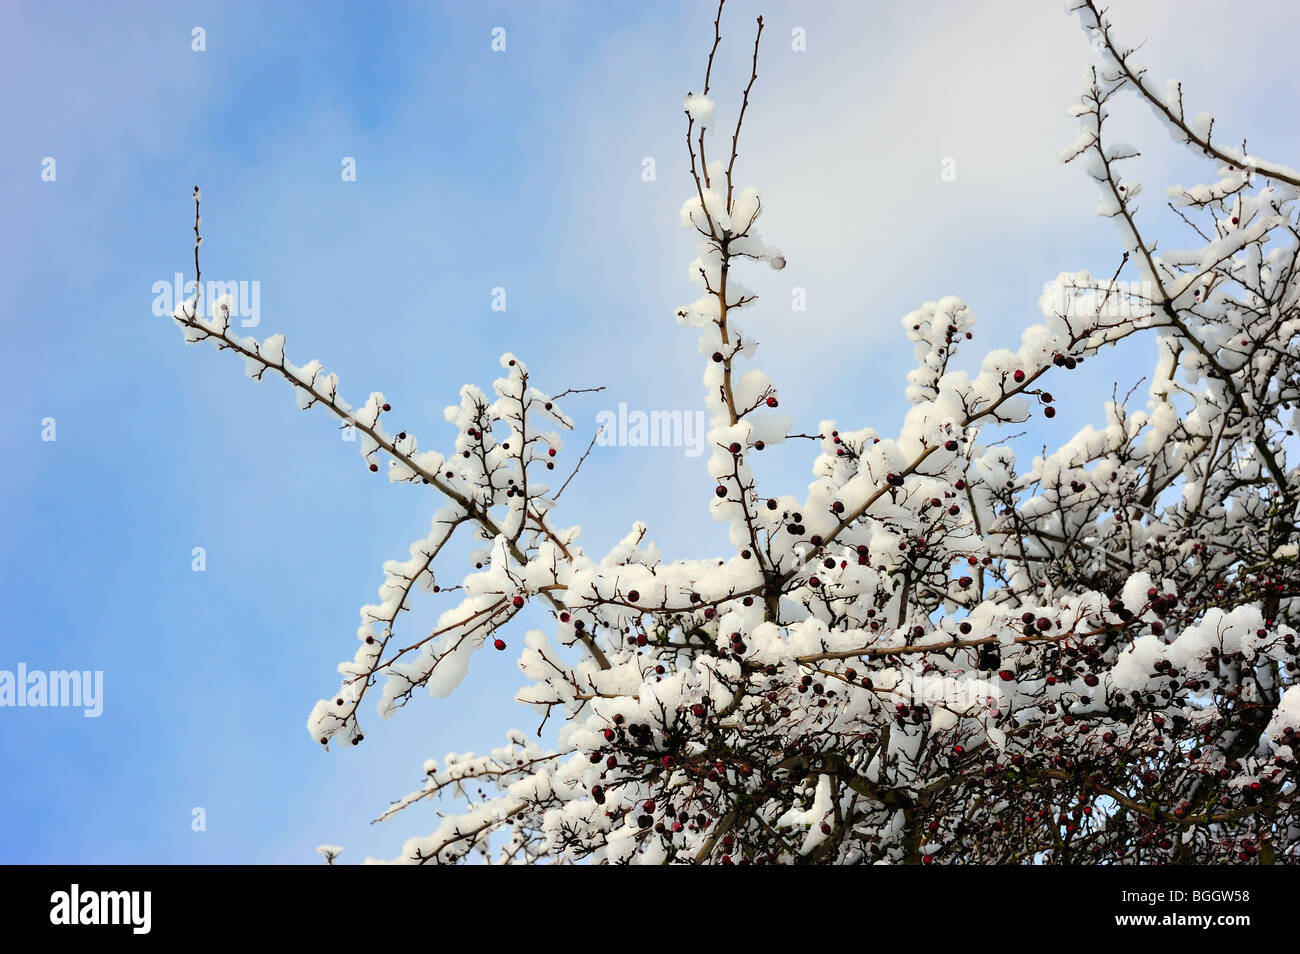 Snow Covered Hawthorn Branches with Berries Stock Photo